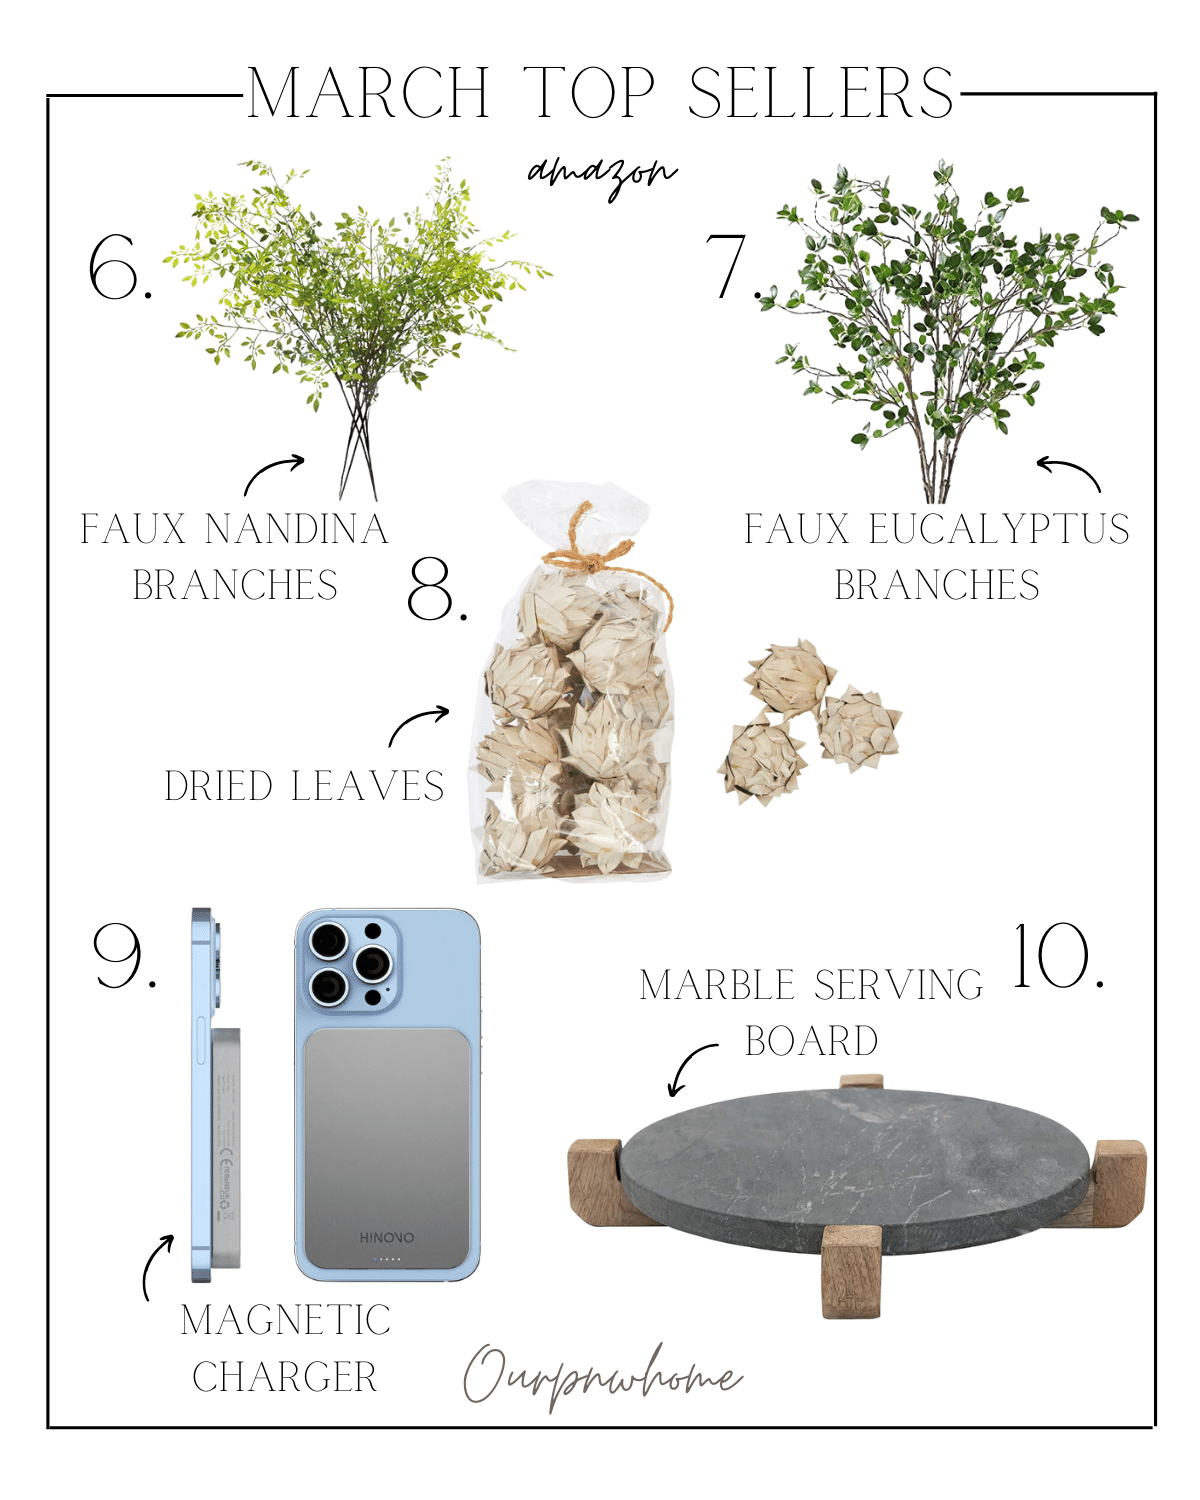 march top sellers, amazon finds, home finds, faux florals, greenery, dried leaves, magnetic charger, marble serving board, home decor, amazon favorites, top 10, best sellers